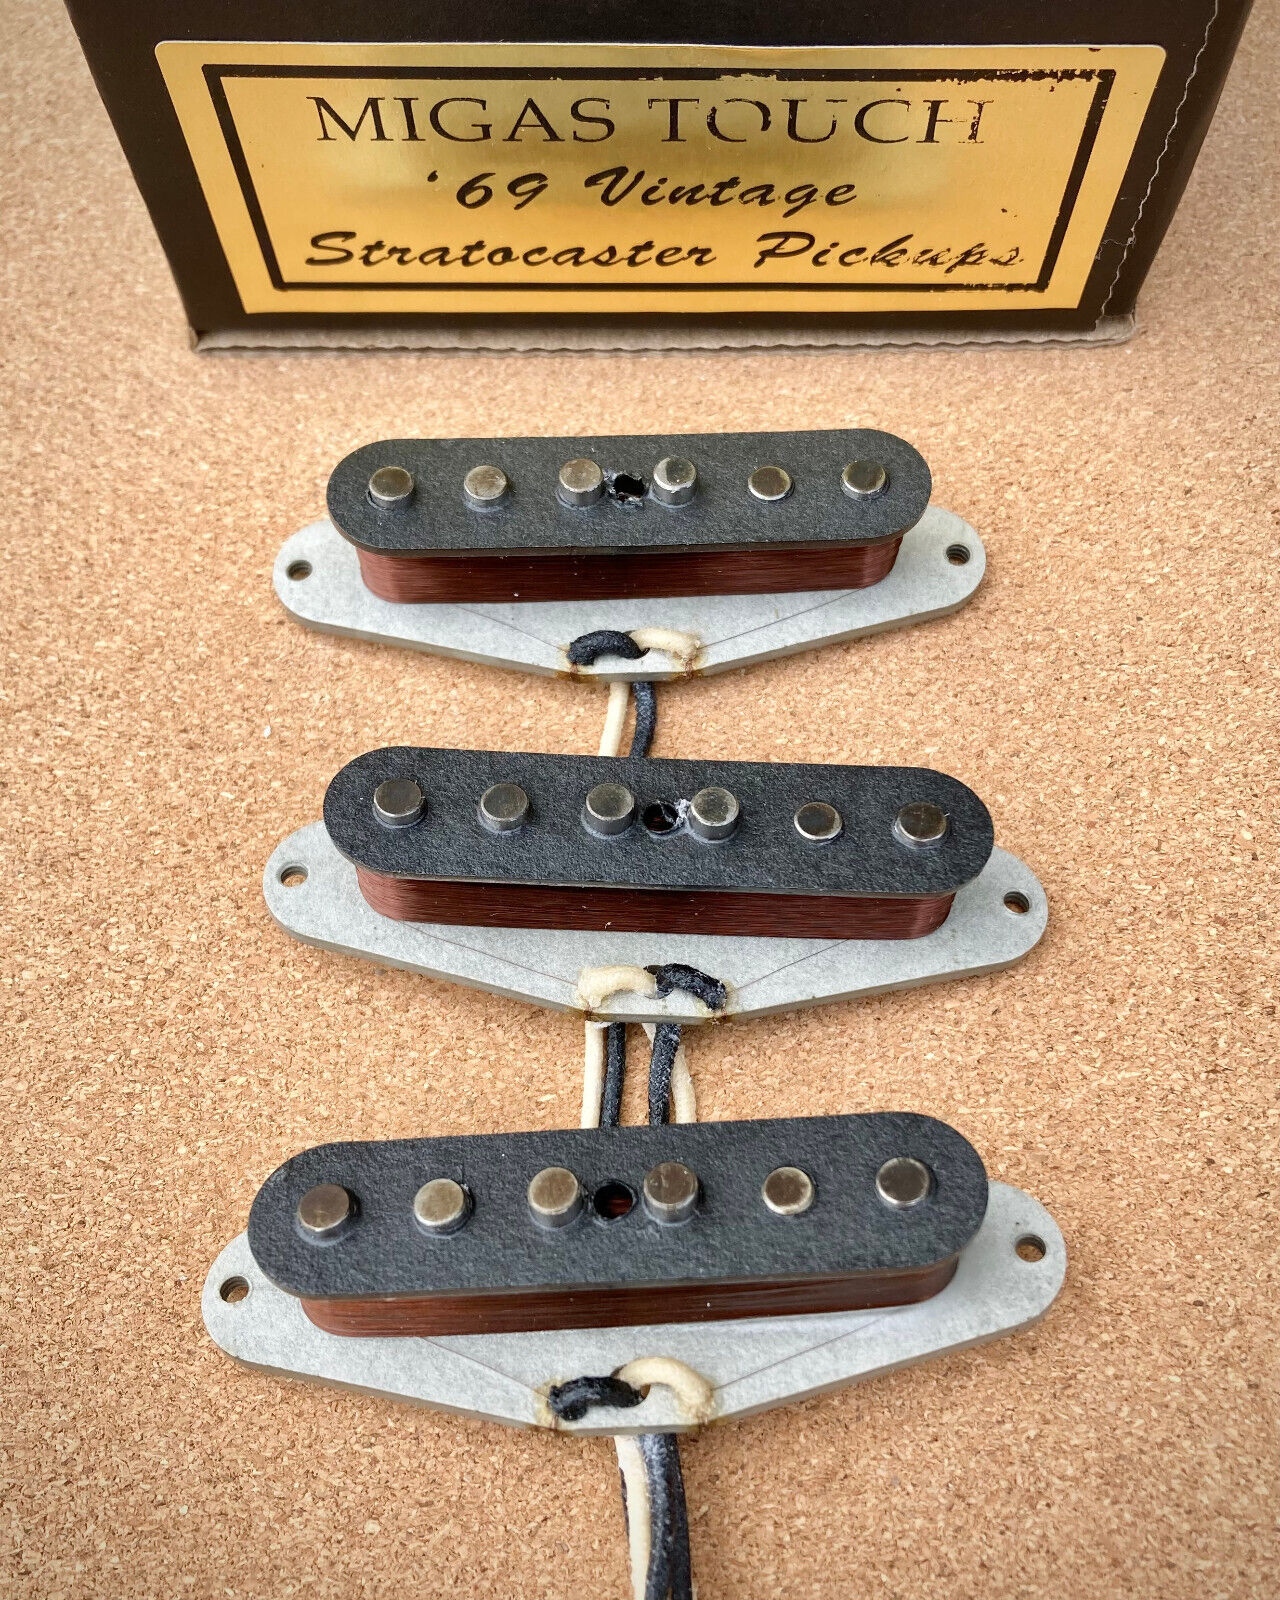 Vintage \'69 Left-Hand Fender Stratocaster Hand Wound Pickup Set by Migas Touch